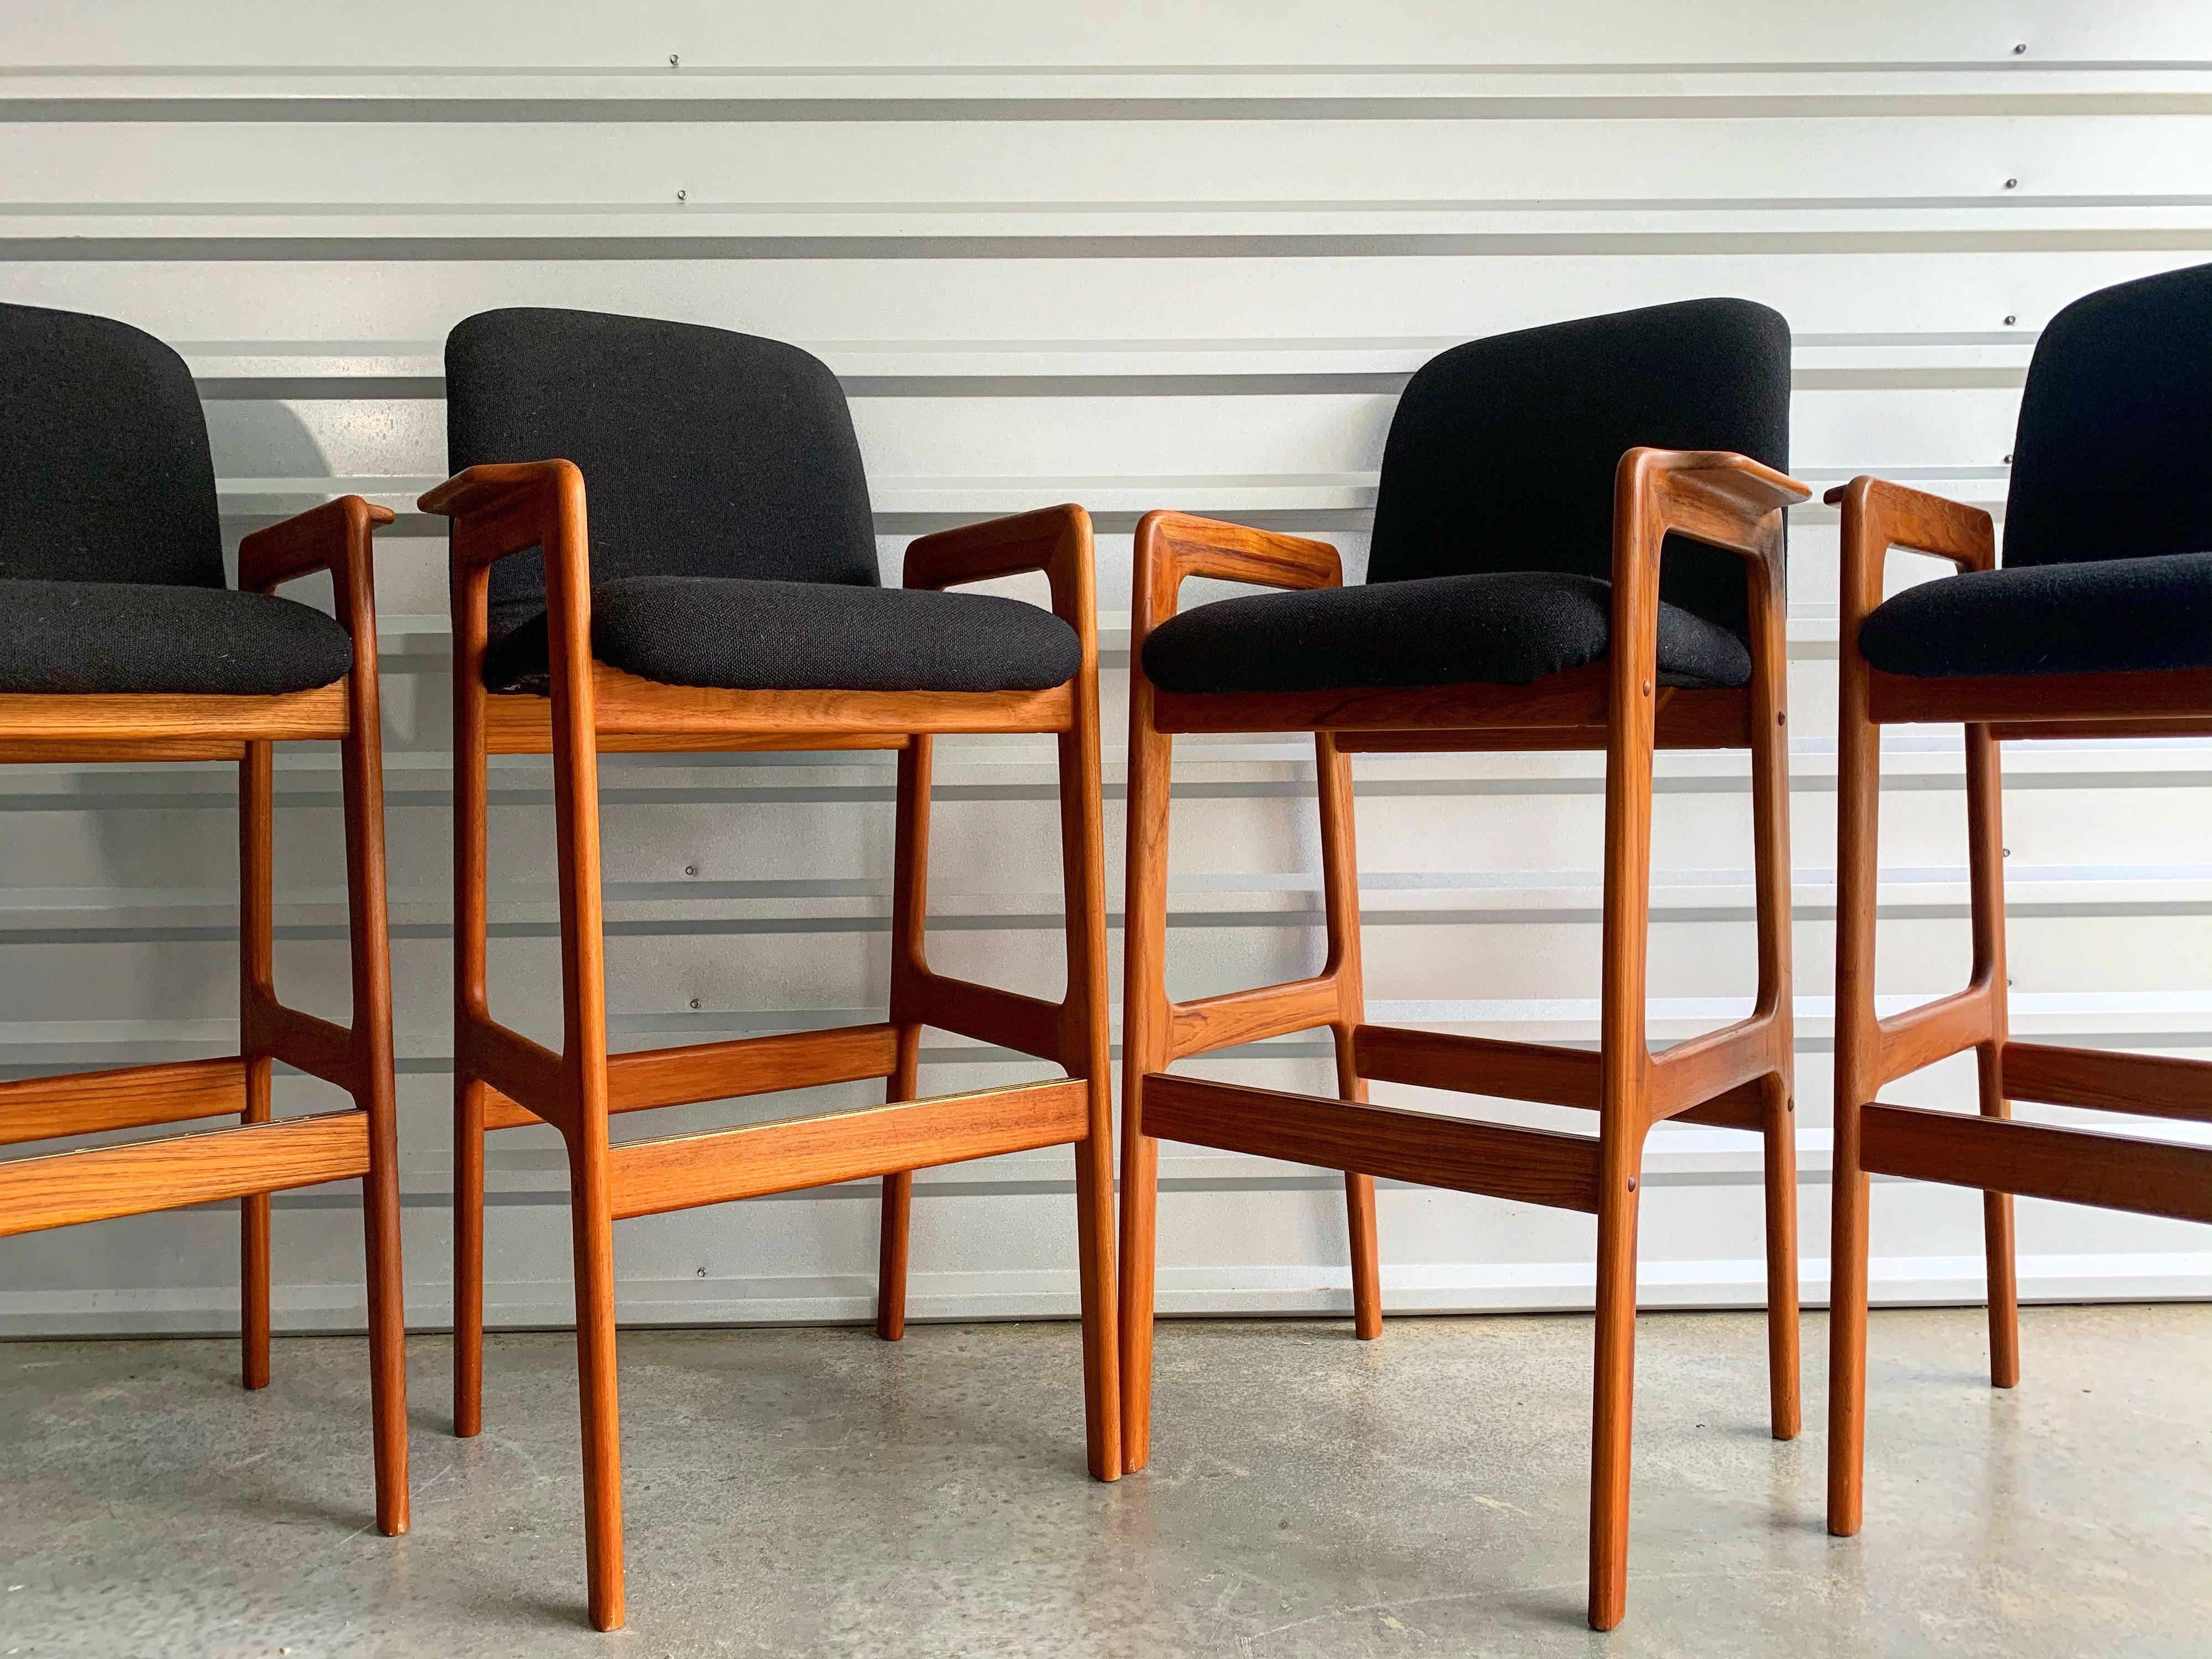 Set of 4 midcentury Danish modern solid teak bar height bar stools by Benny Linden. Original black wool tweed upholstery and corrugated brass plate on the footrest.
Teak frames are clean, sound and sturdy with a rich amber hue. Original black